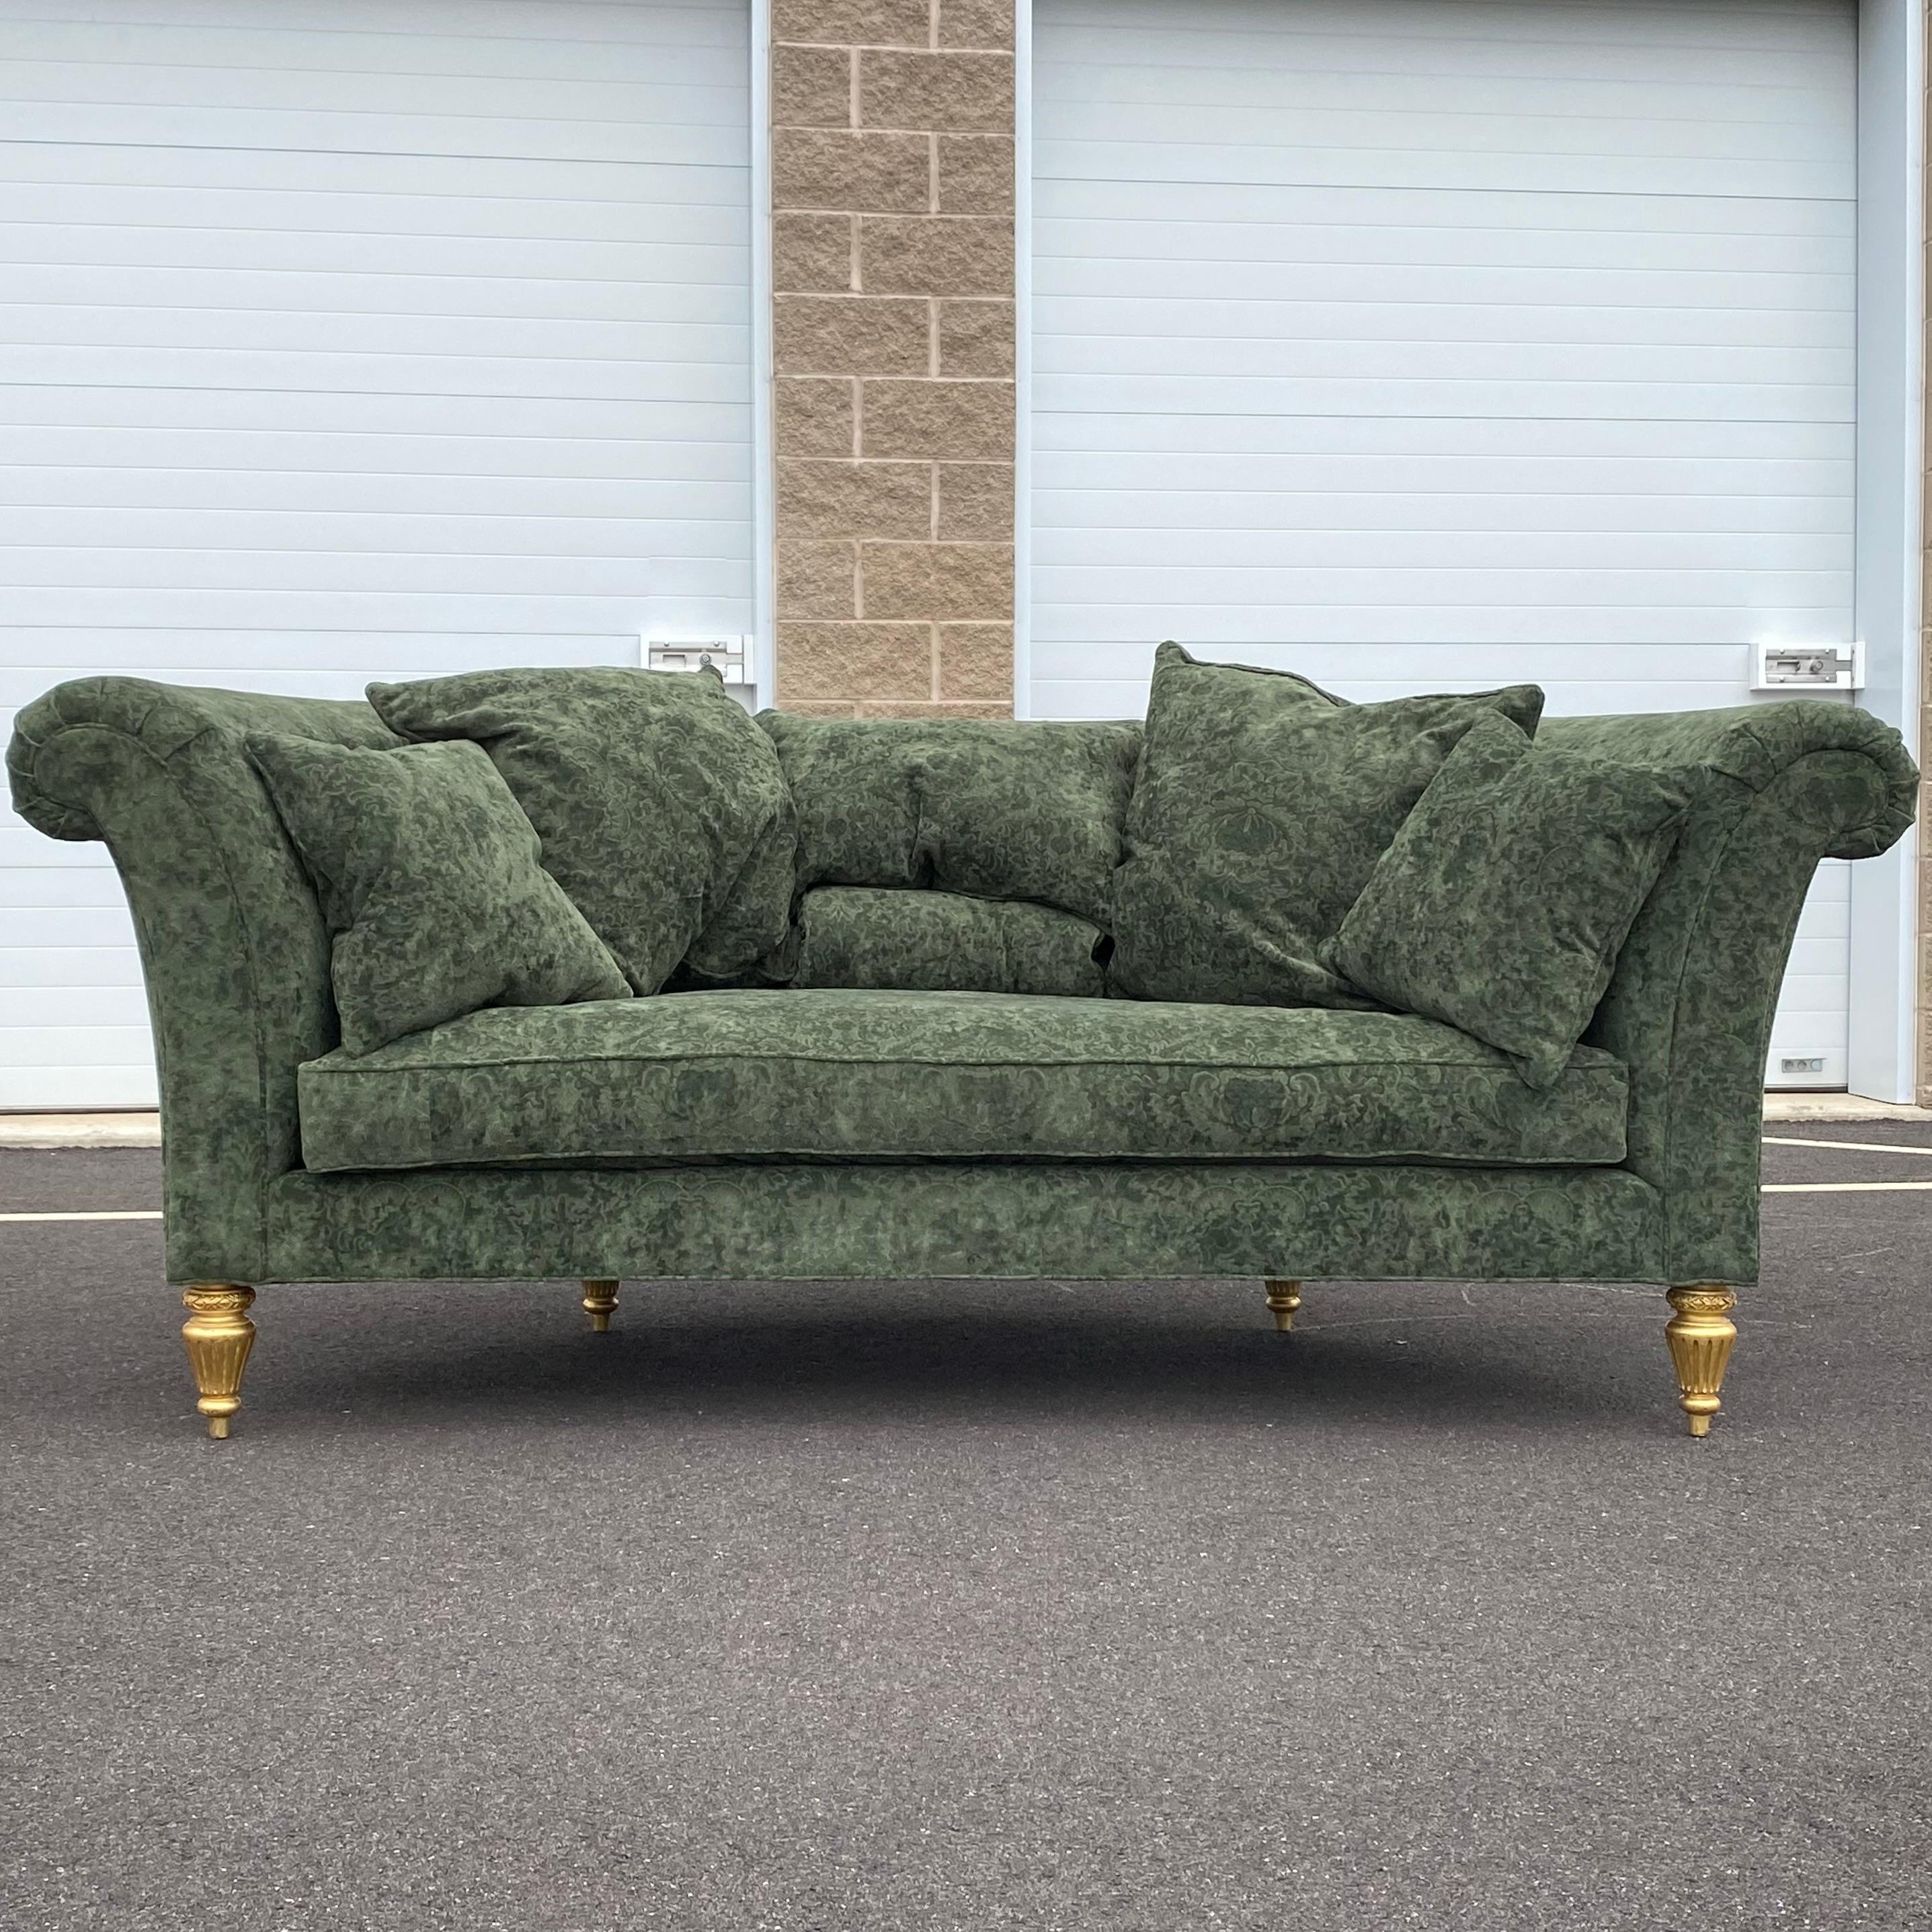 Henredon Schoonbeck Collection Green Damask Demilune Sofa With Six Throw Pillows For Sale 6